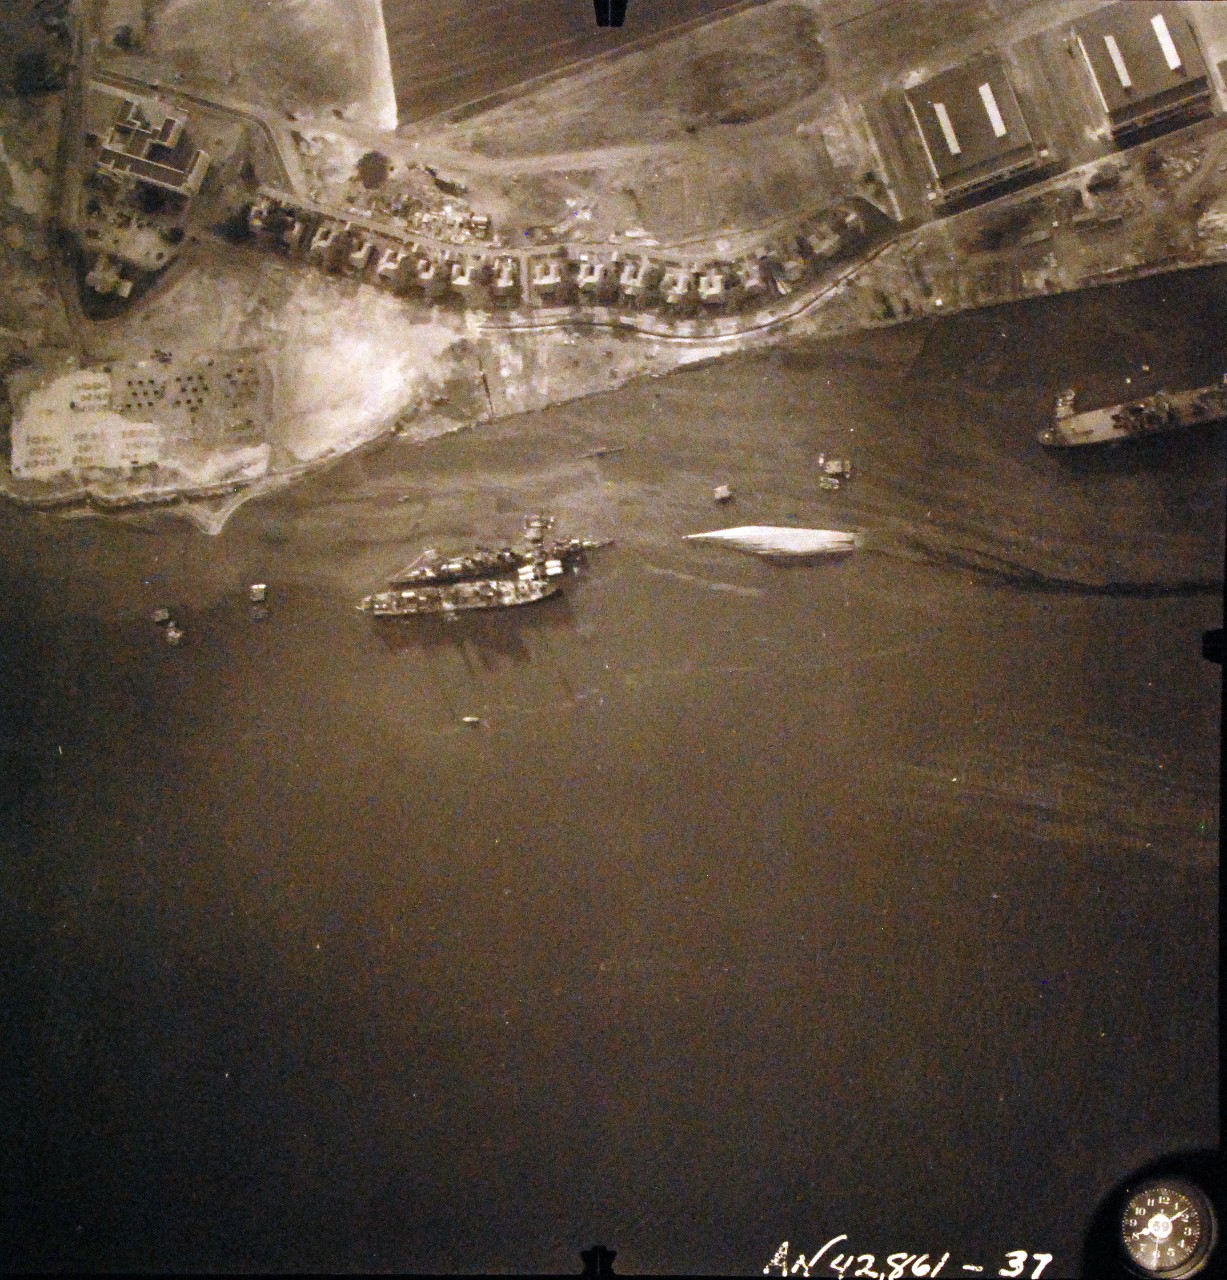 80-G-387596:  Pearl Harbor Attack, 7 December 1941.  Aerial view of "Battleship Row" moorings on the southern side of Ford Island, 10 December 1941, showing damage from the Japanese raid three days earlier.  Shown are USS Raleigh (CL 7), sunk, and USS Utah (BB 31), capsized.  Note dark oil streaks on the harbor surface, originating from the sunken battleships. Photographed by VJ-1 at an altitude of 3,000 feet and released November 9, 1950. U.S. Navy photograph, now in the collections of the National Archives.       (9/22/2015).